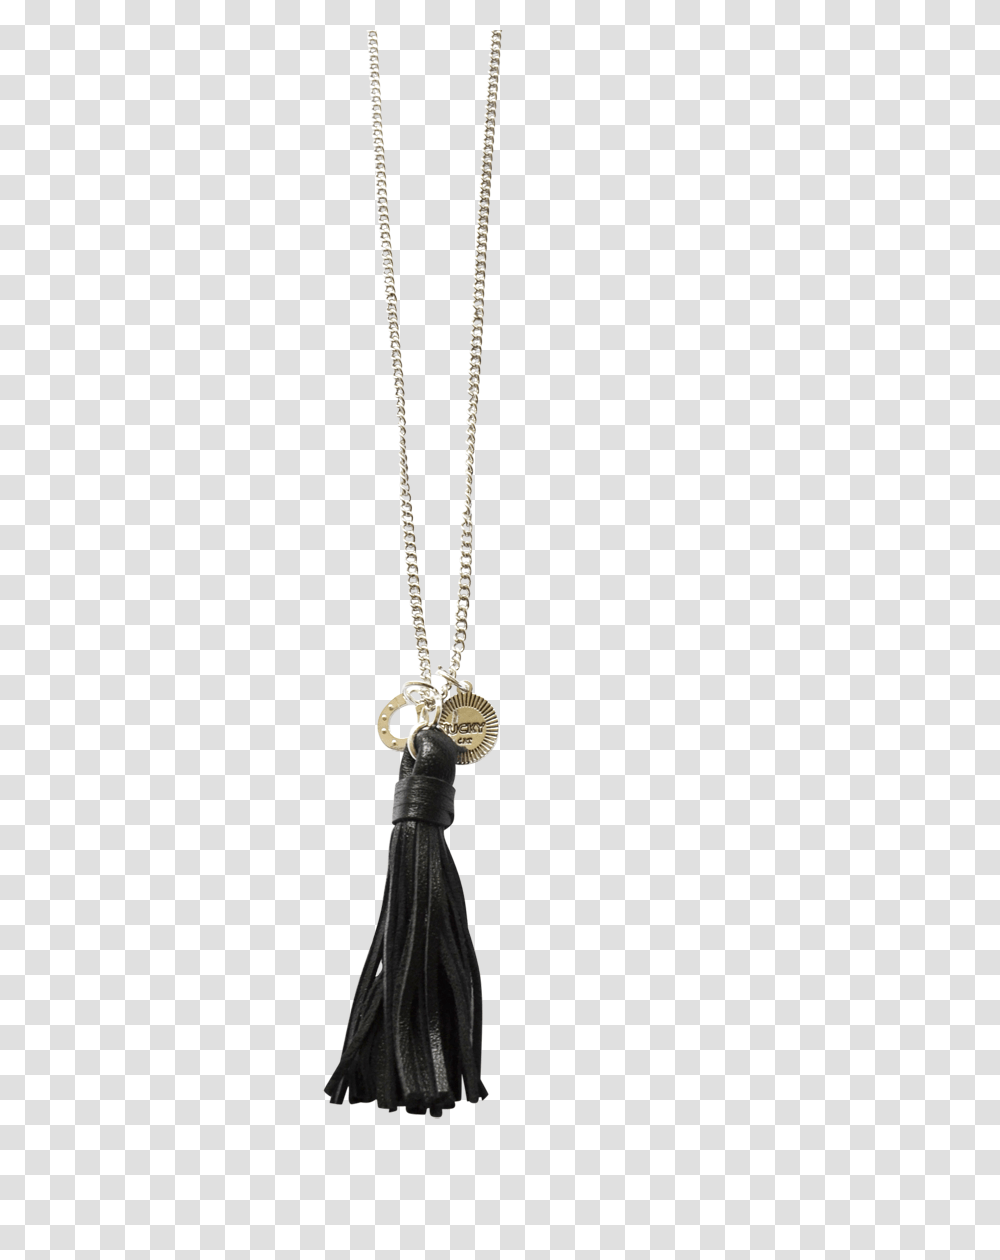 Leather Tassel Necklace Chain, Pendant, Jewelry, Accessories, Accessory Transparent Png